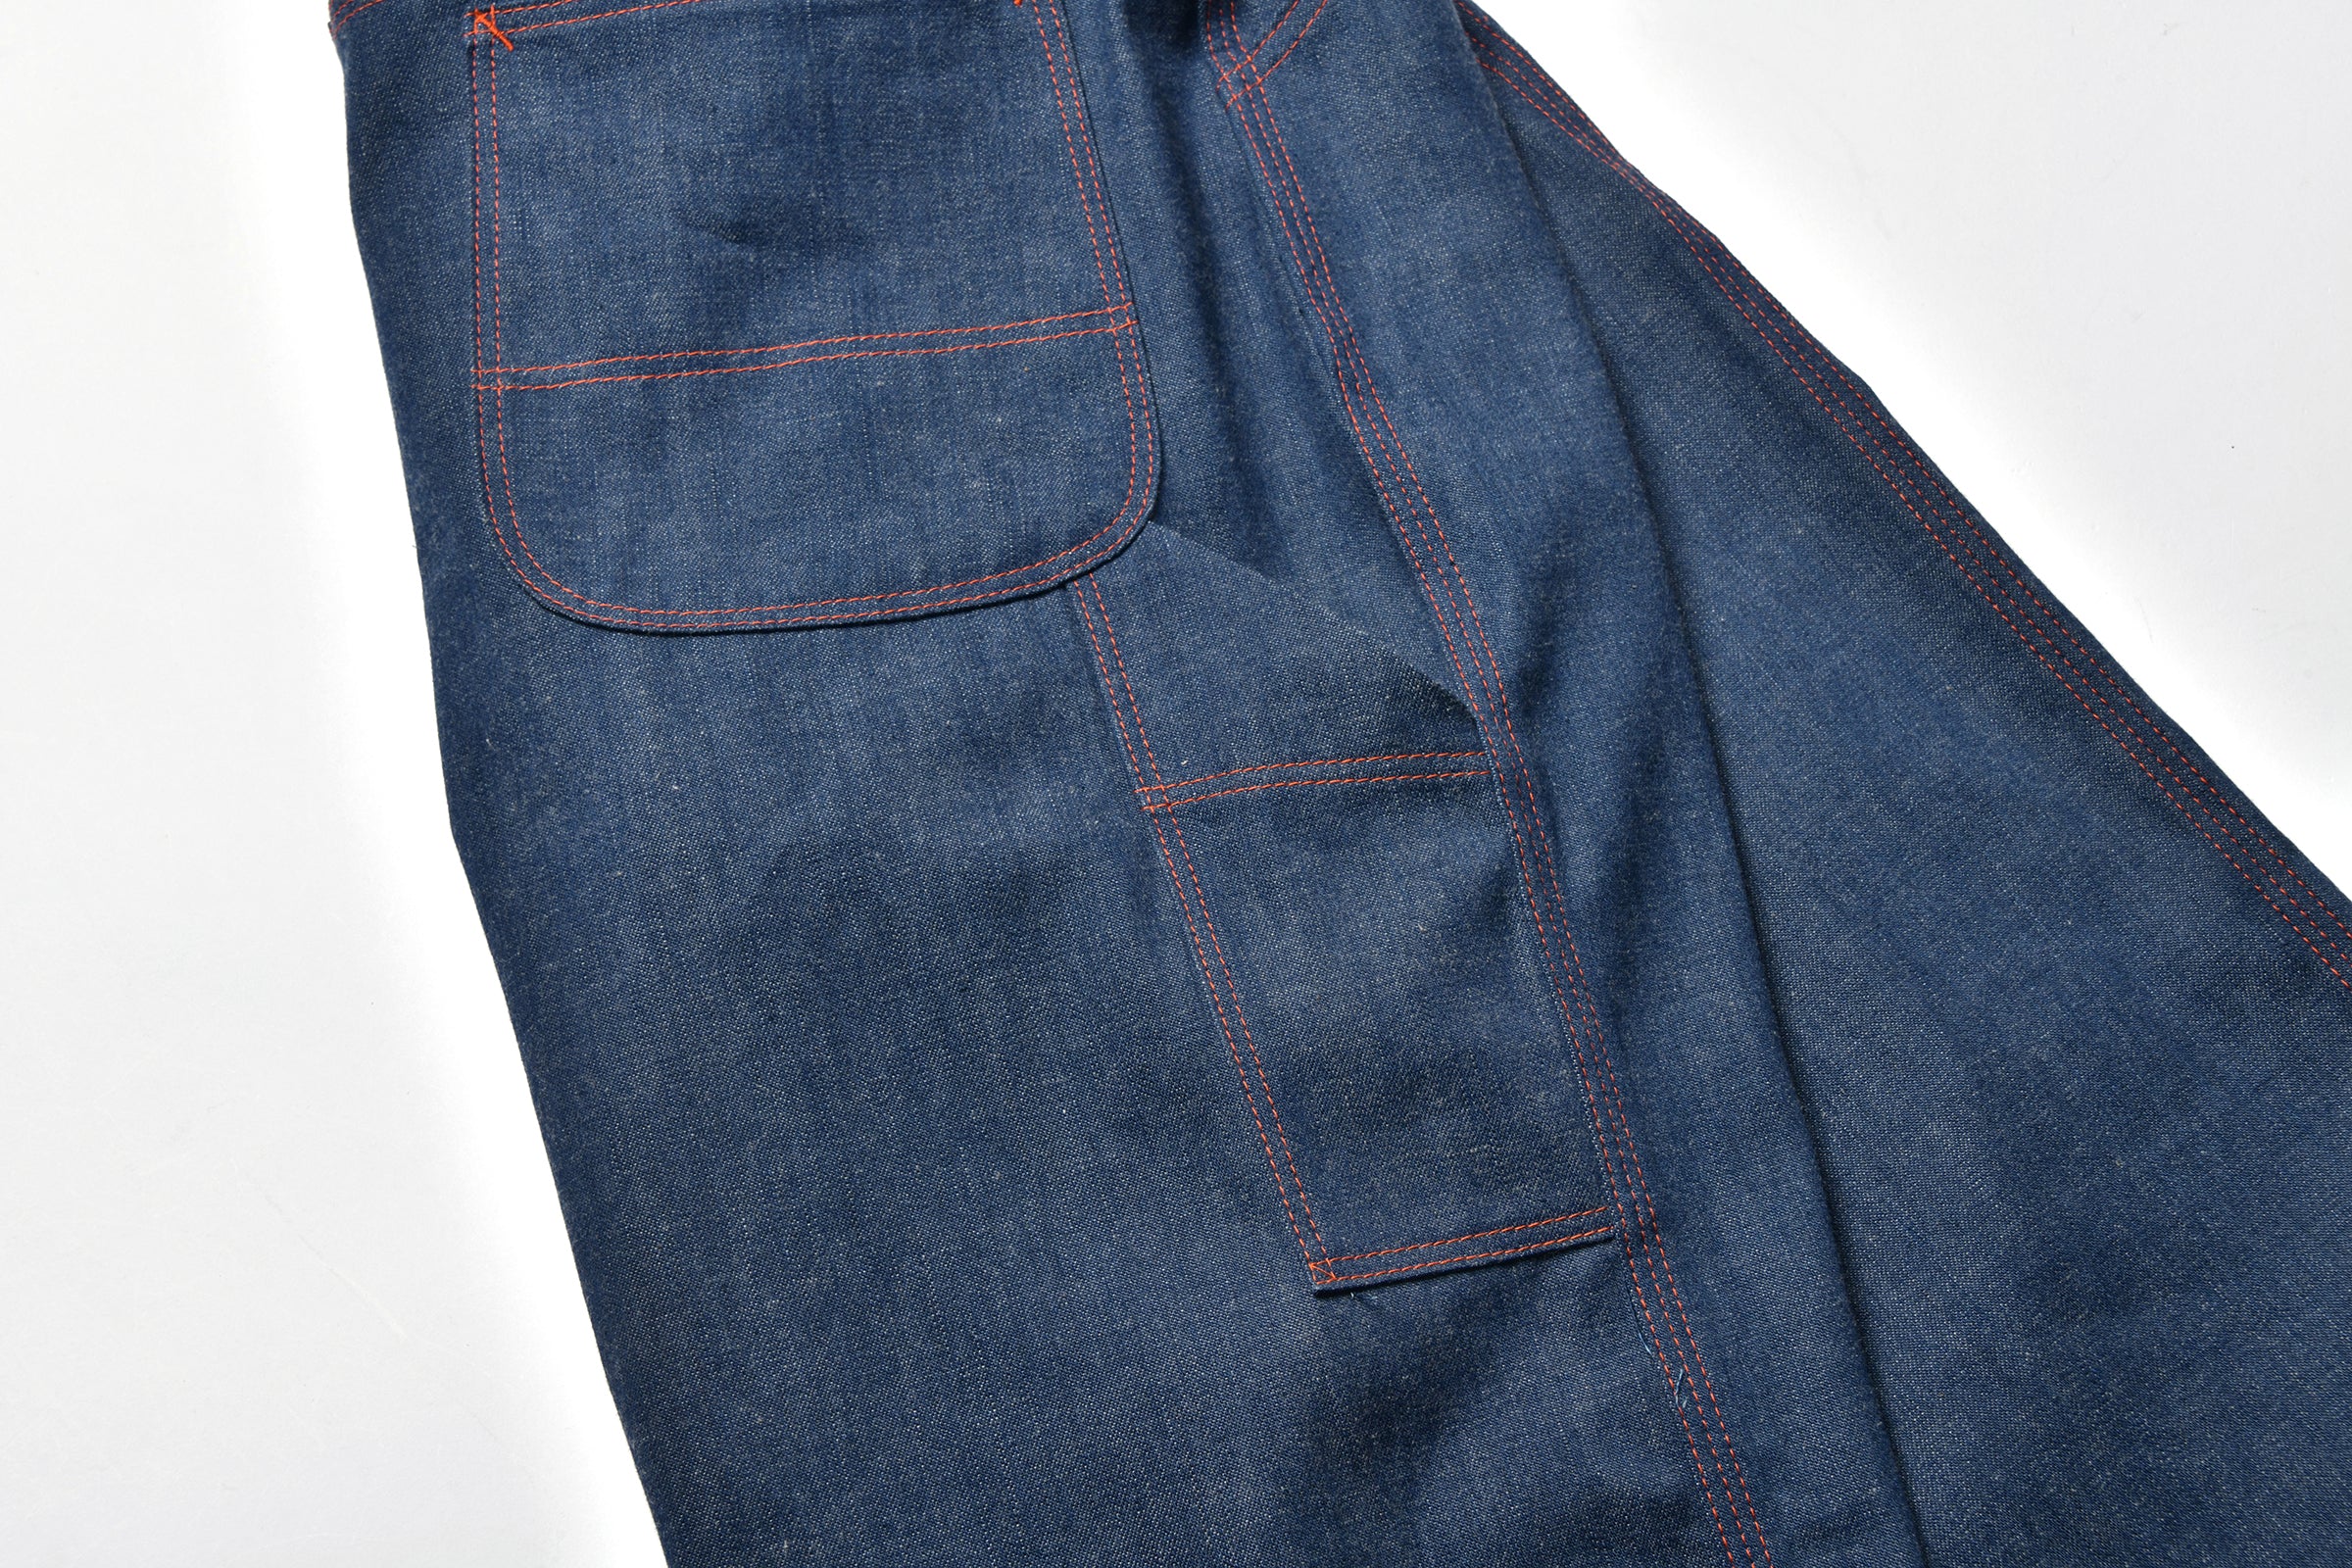 TRIPLE-STITCHED DENIM WORK TROUSERS – The Real McCoy's